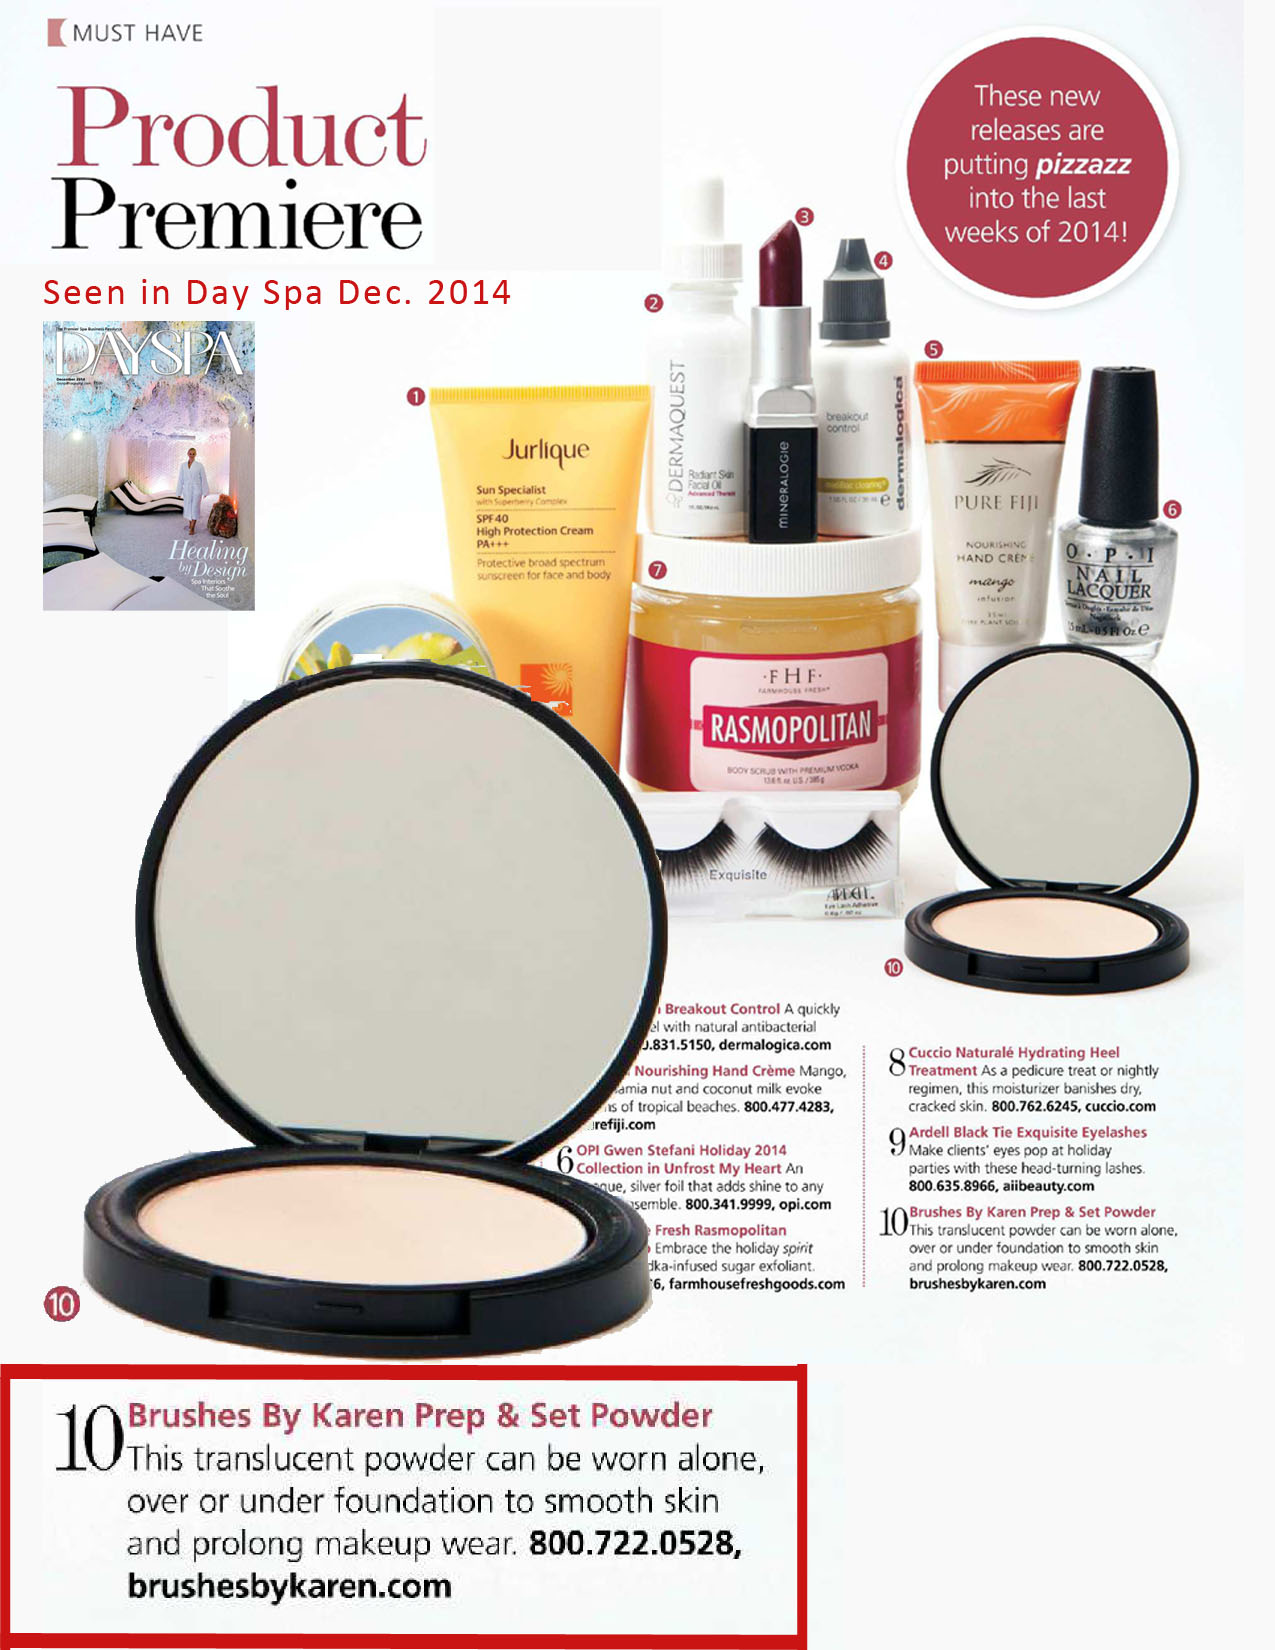 Pep & Set Powders featured in Day Spa Magazine - December 2012